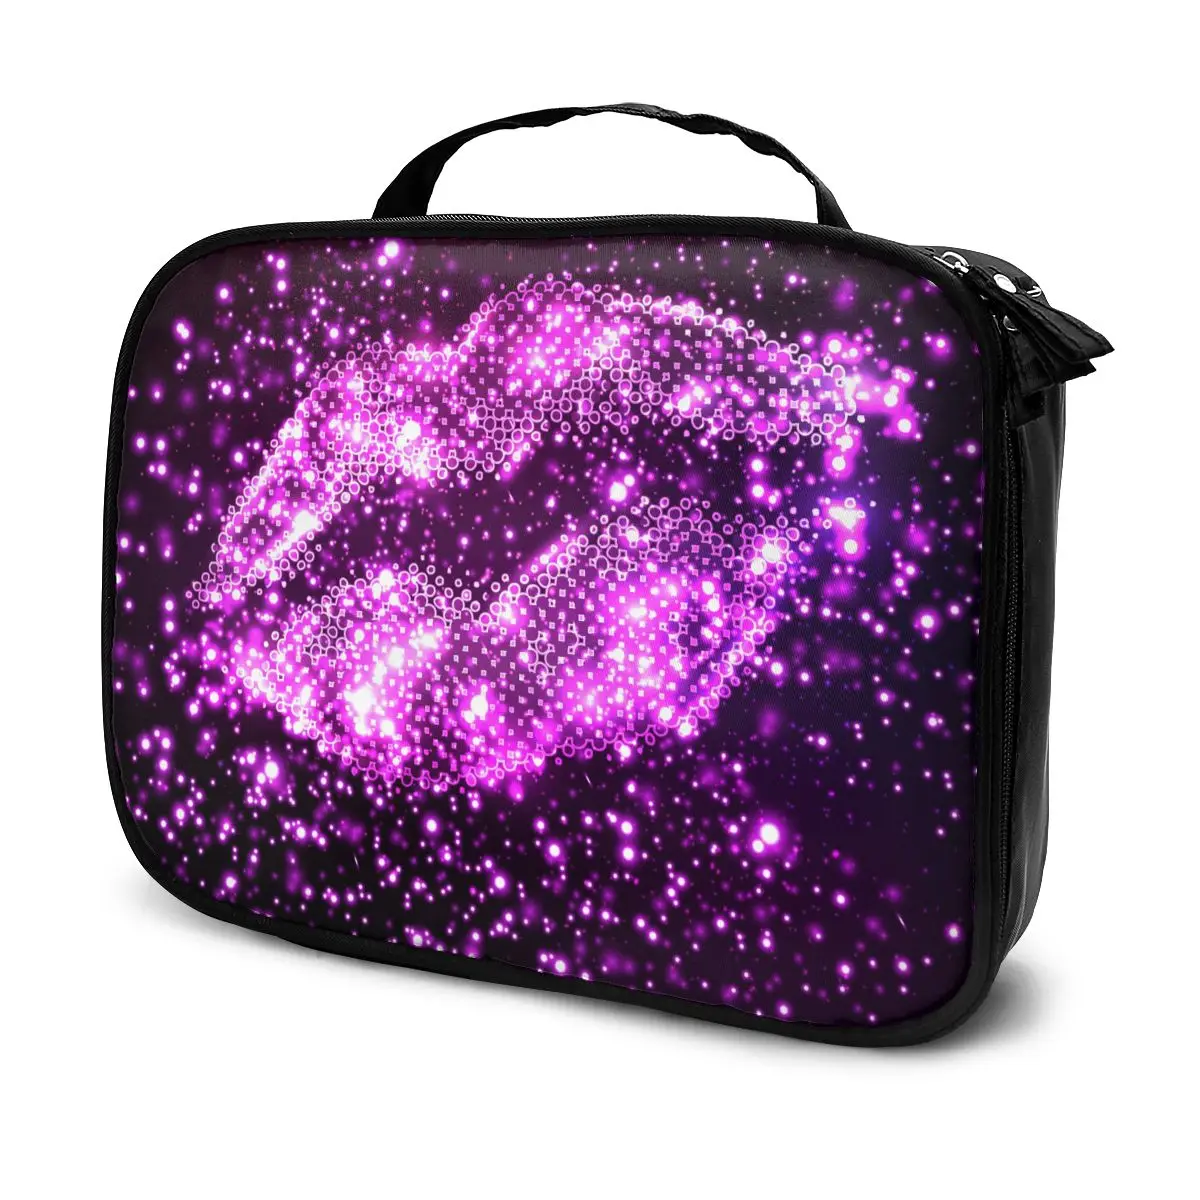 

Portable Women Make Up Cosmetic Bag Bright Purple Lips Waterproof Travel Beauty Case Organizer Toiletry Kit Bag Wash Pouch